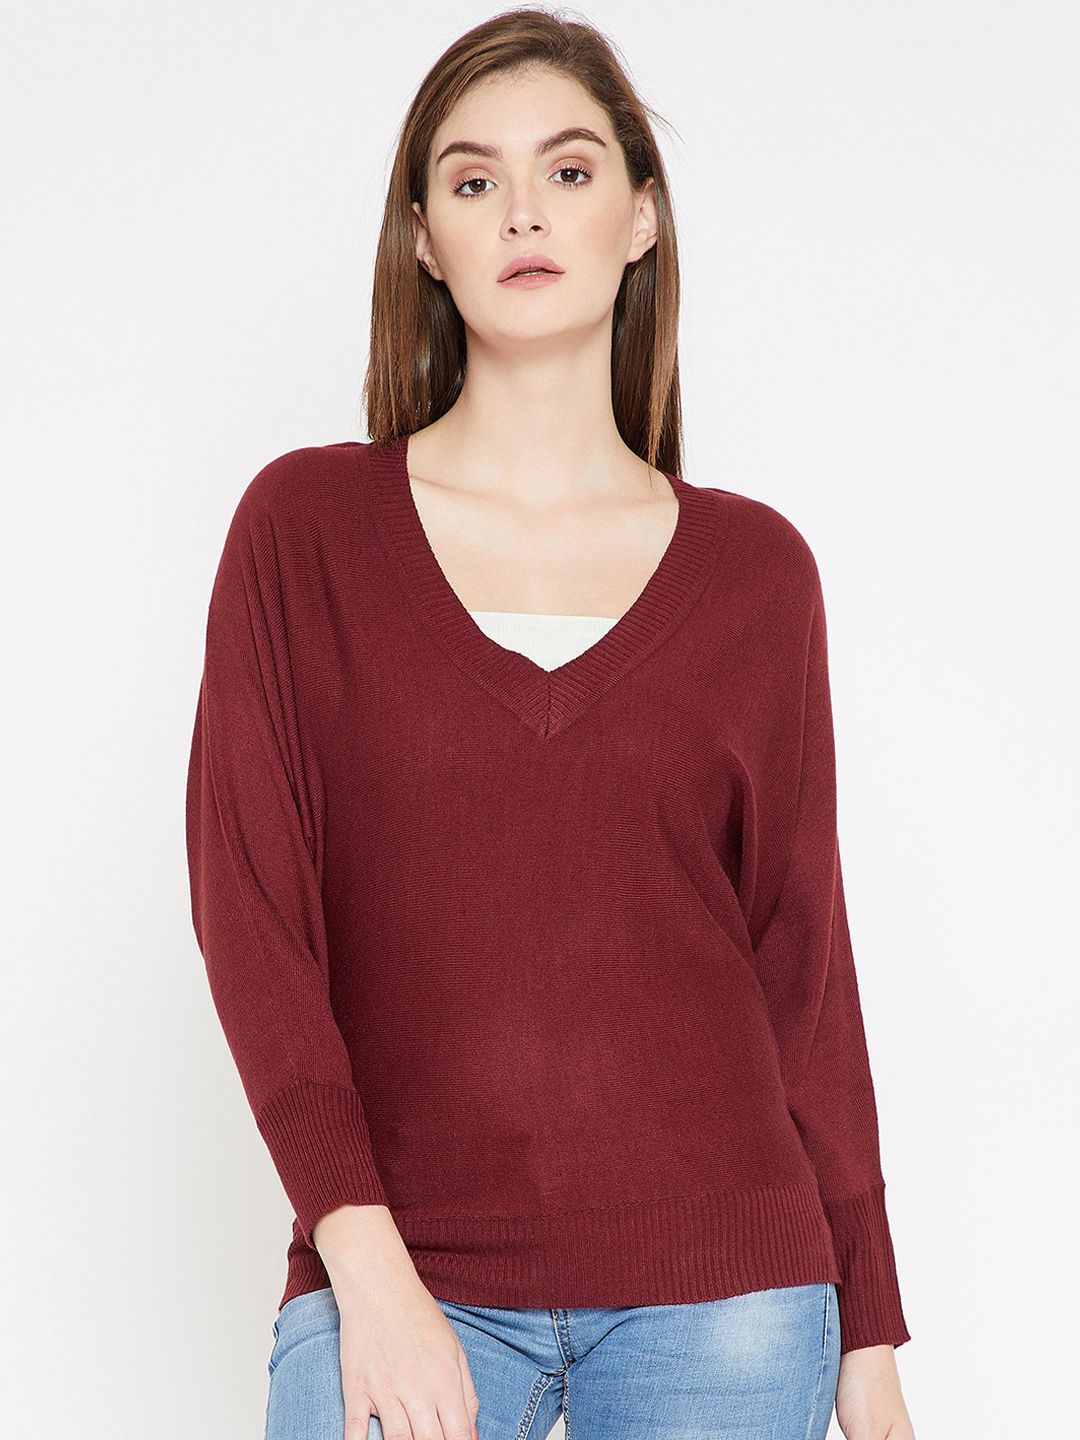 Carlton London Women Maroon Solid Pullover Sweater Price in India